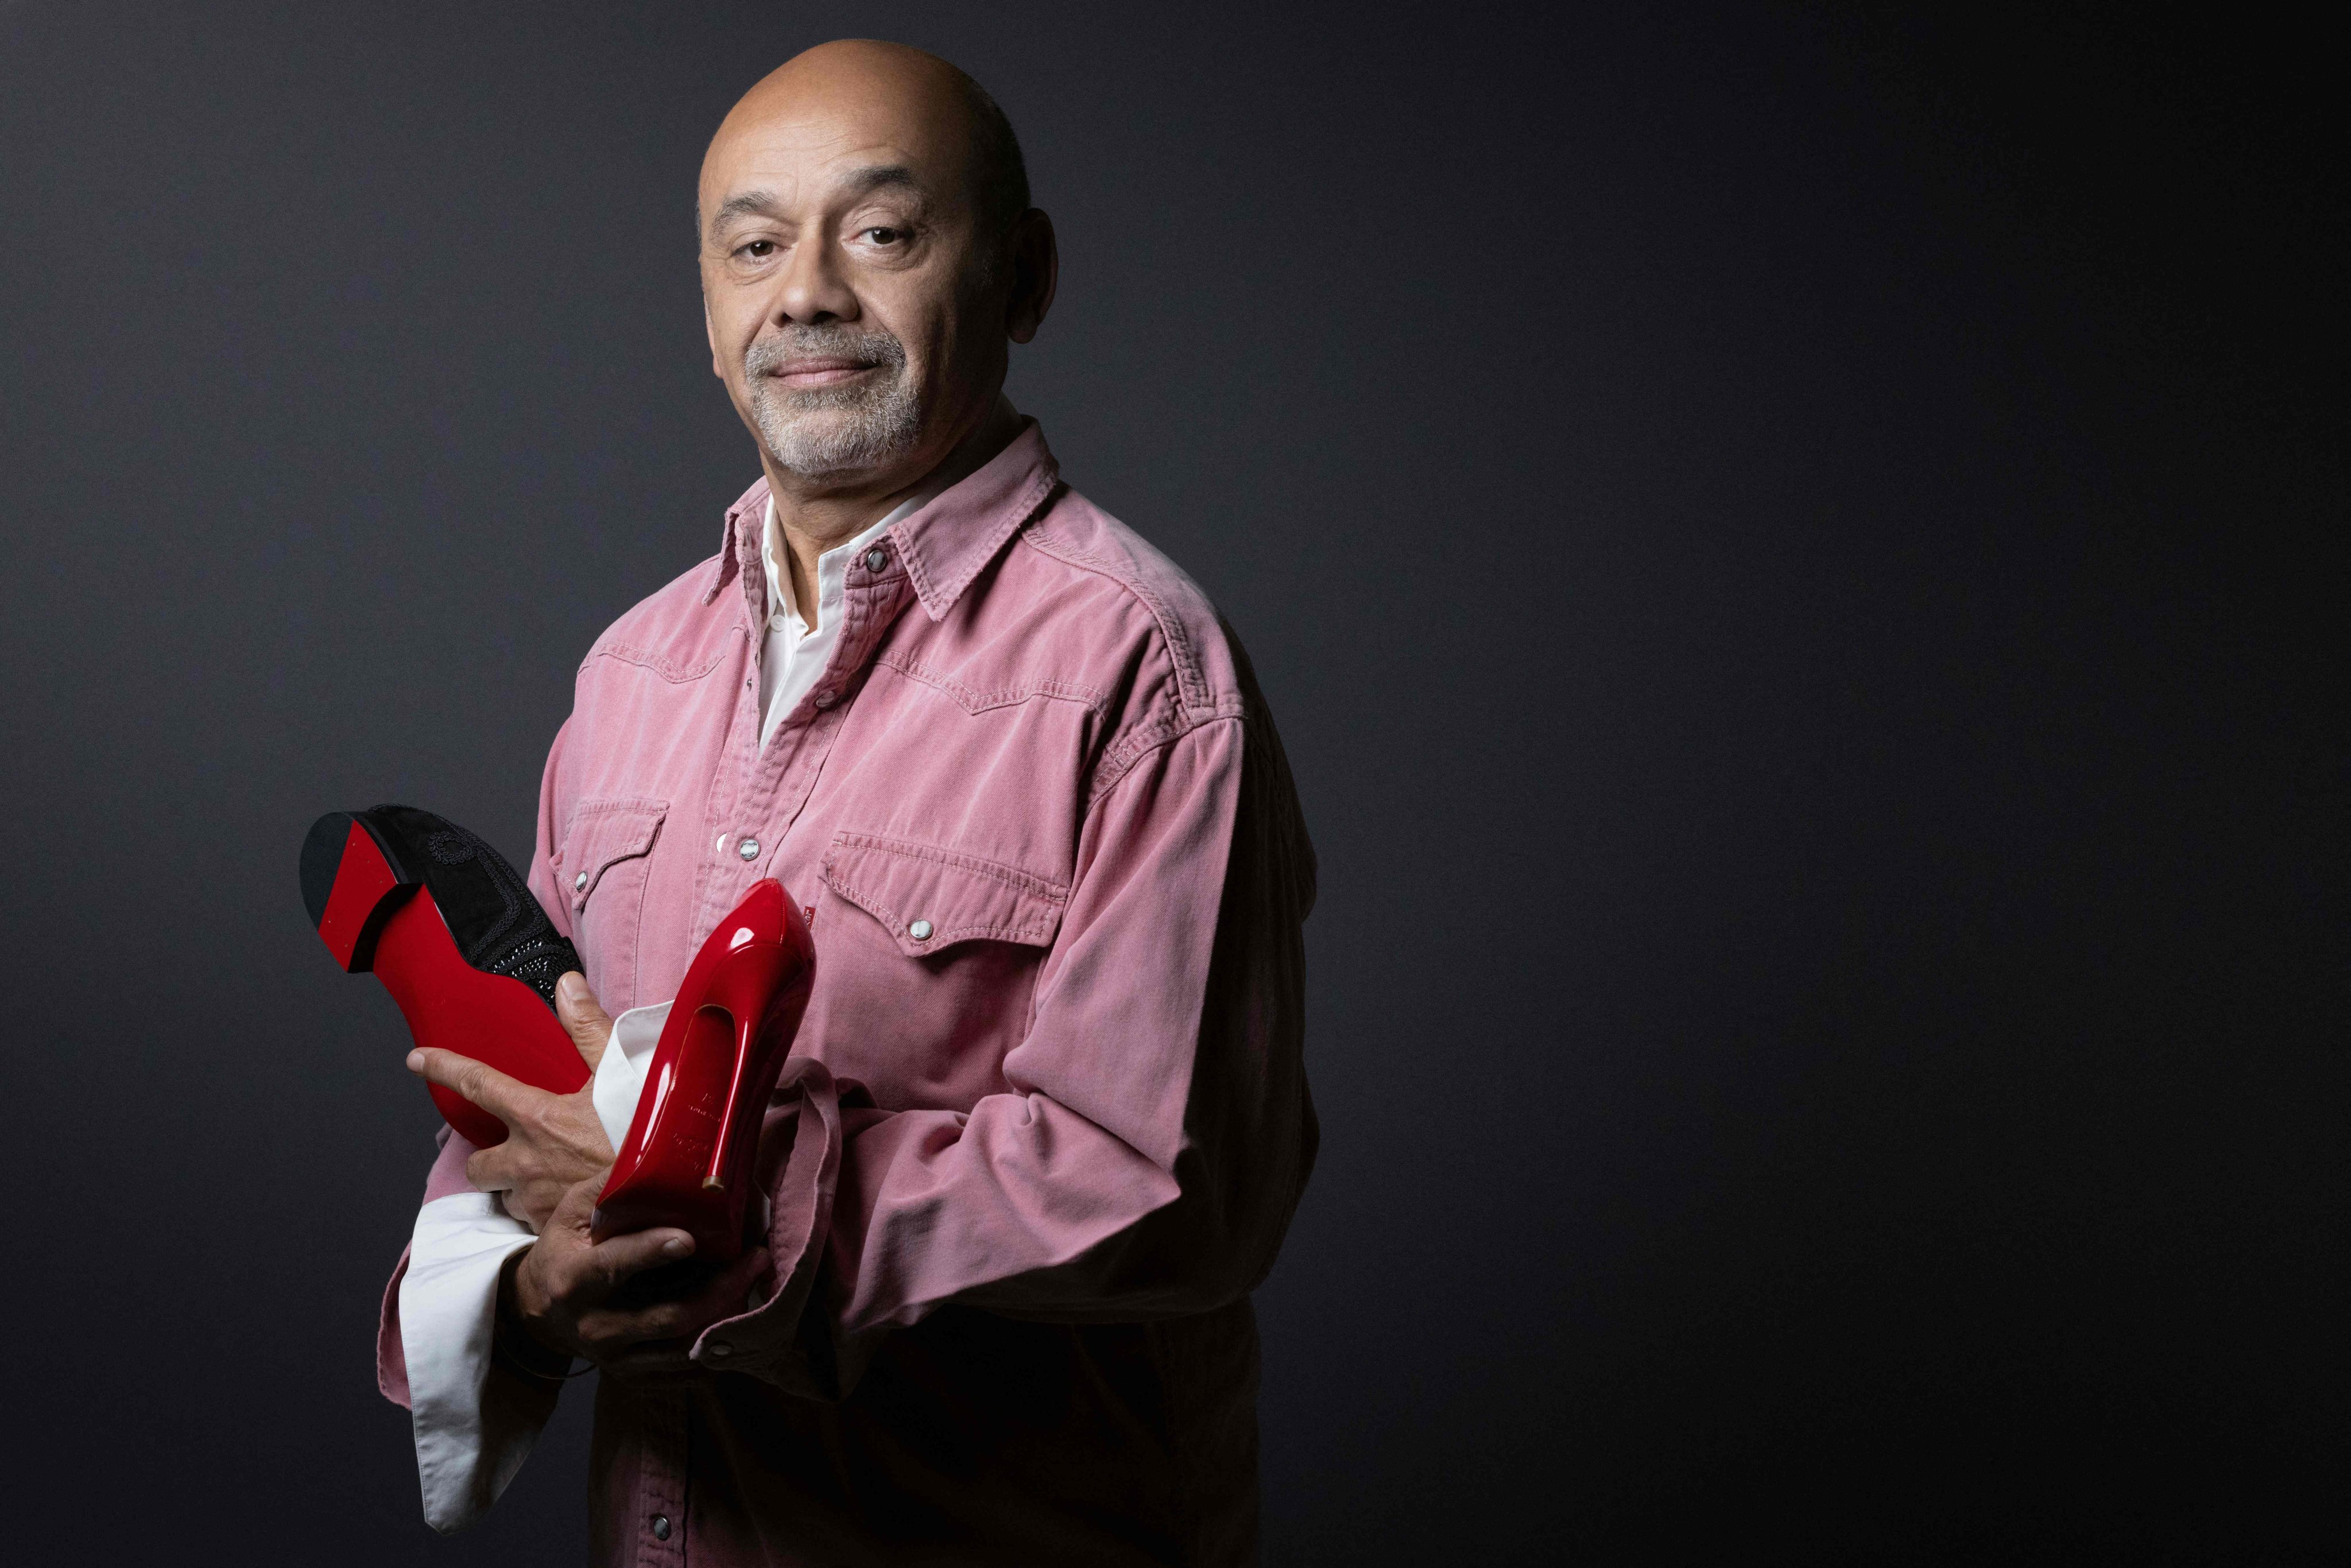 Red soles: Celebrating shoe designer Christian Louboutin and his